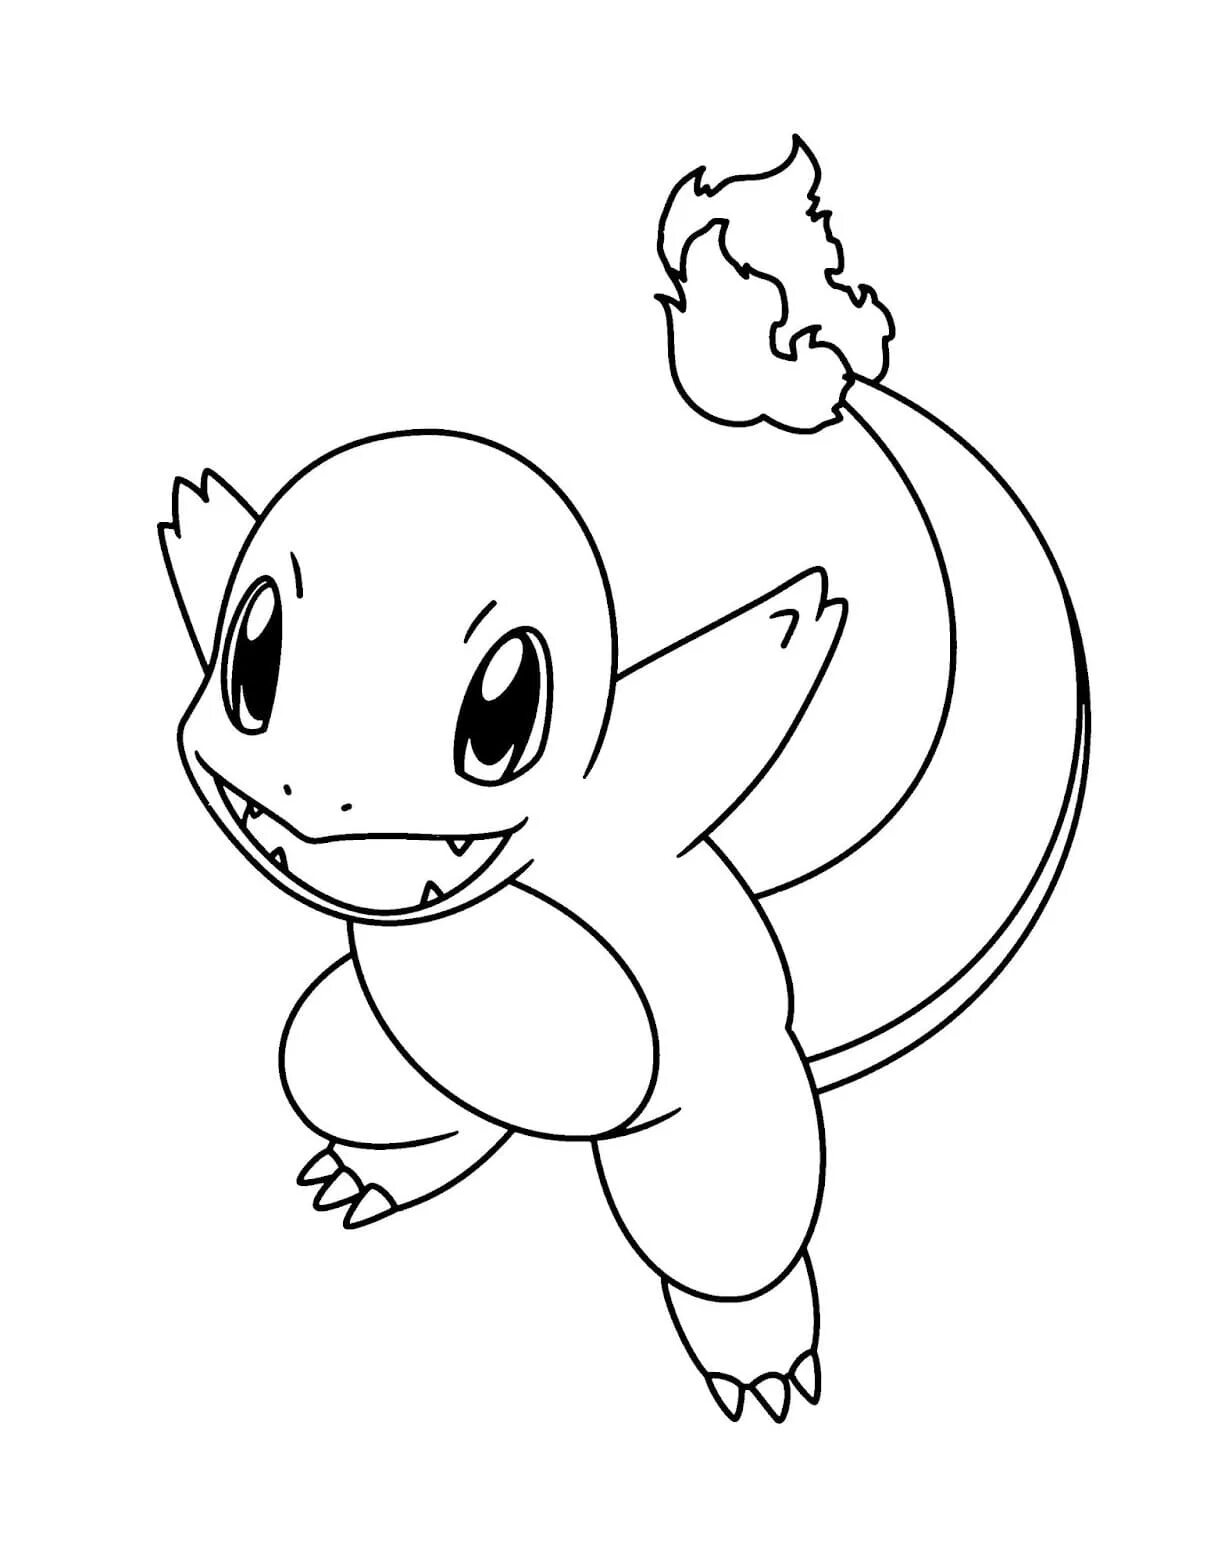 Good quality adorable pokemon coloring page